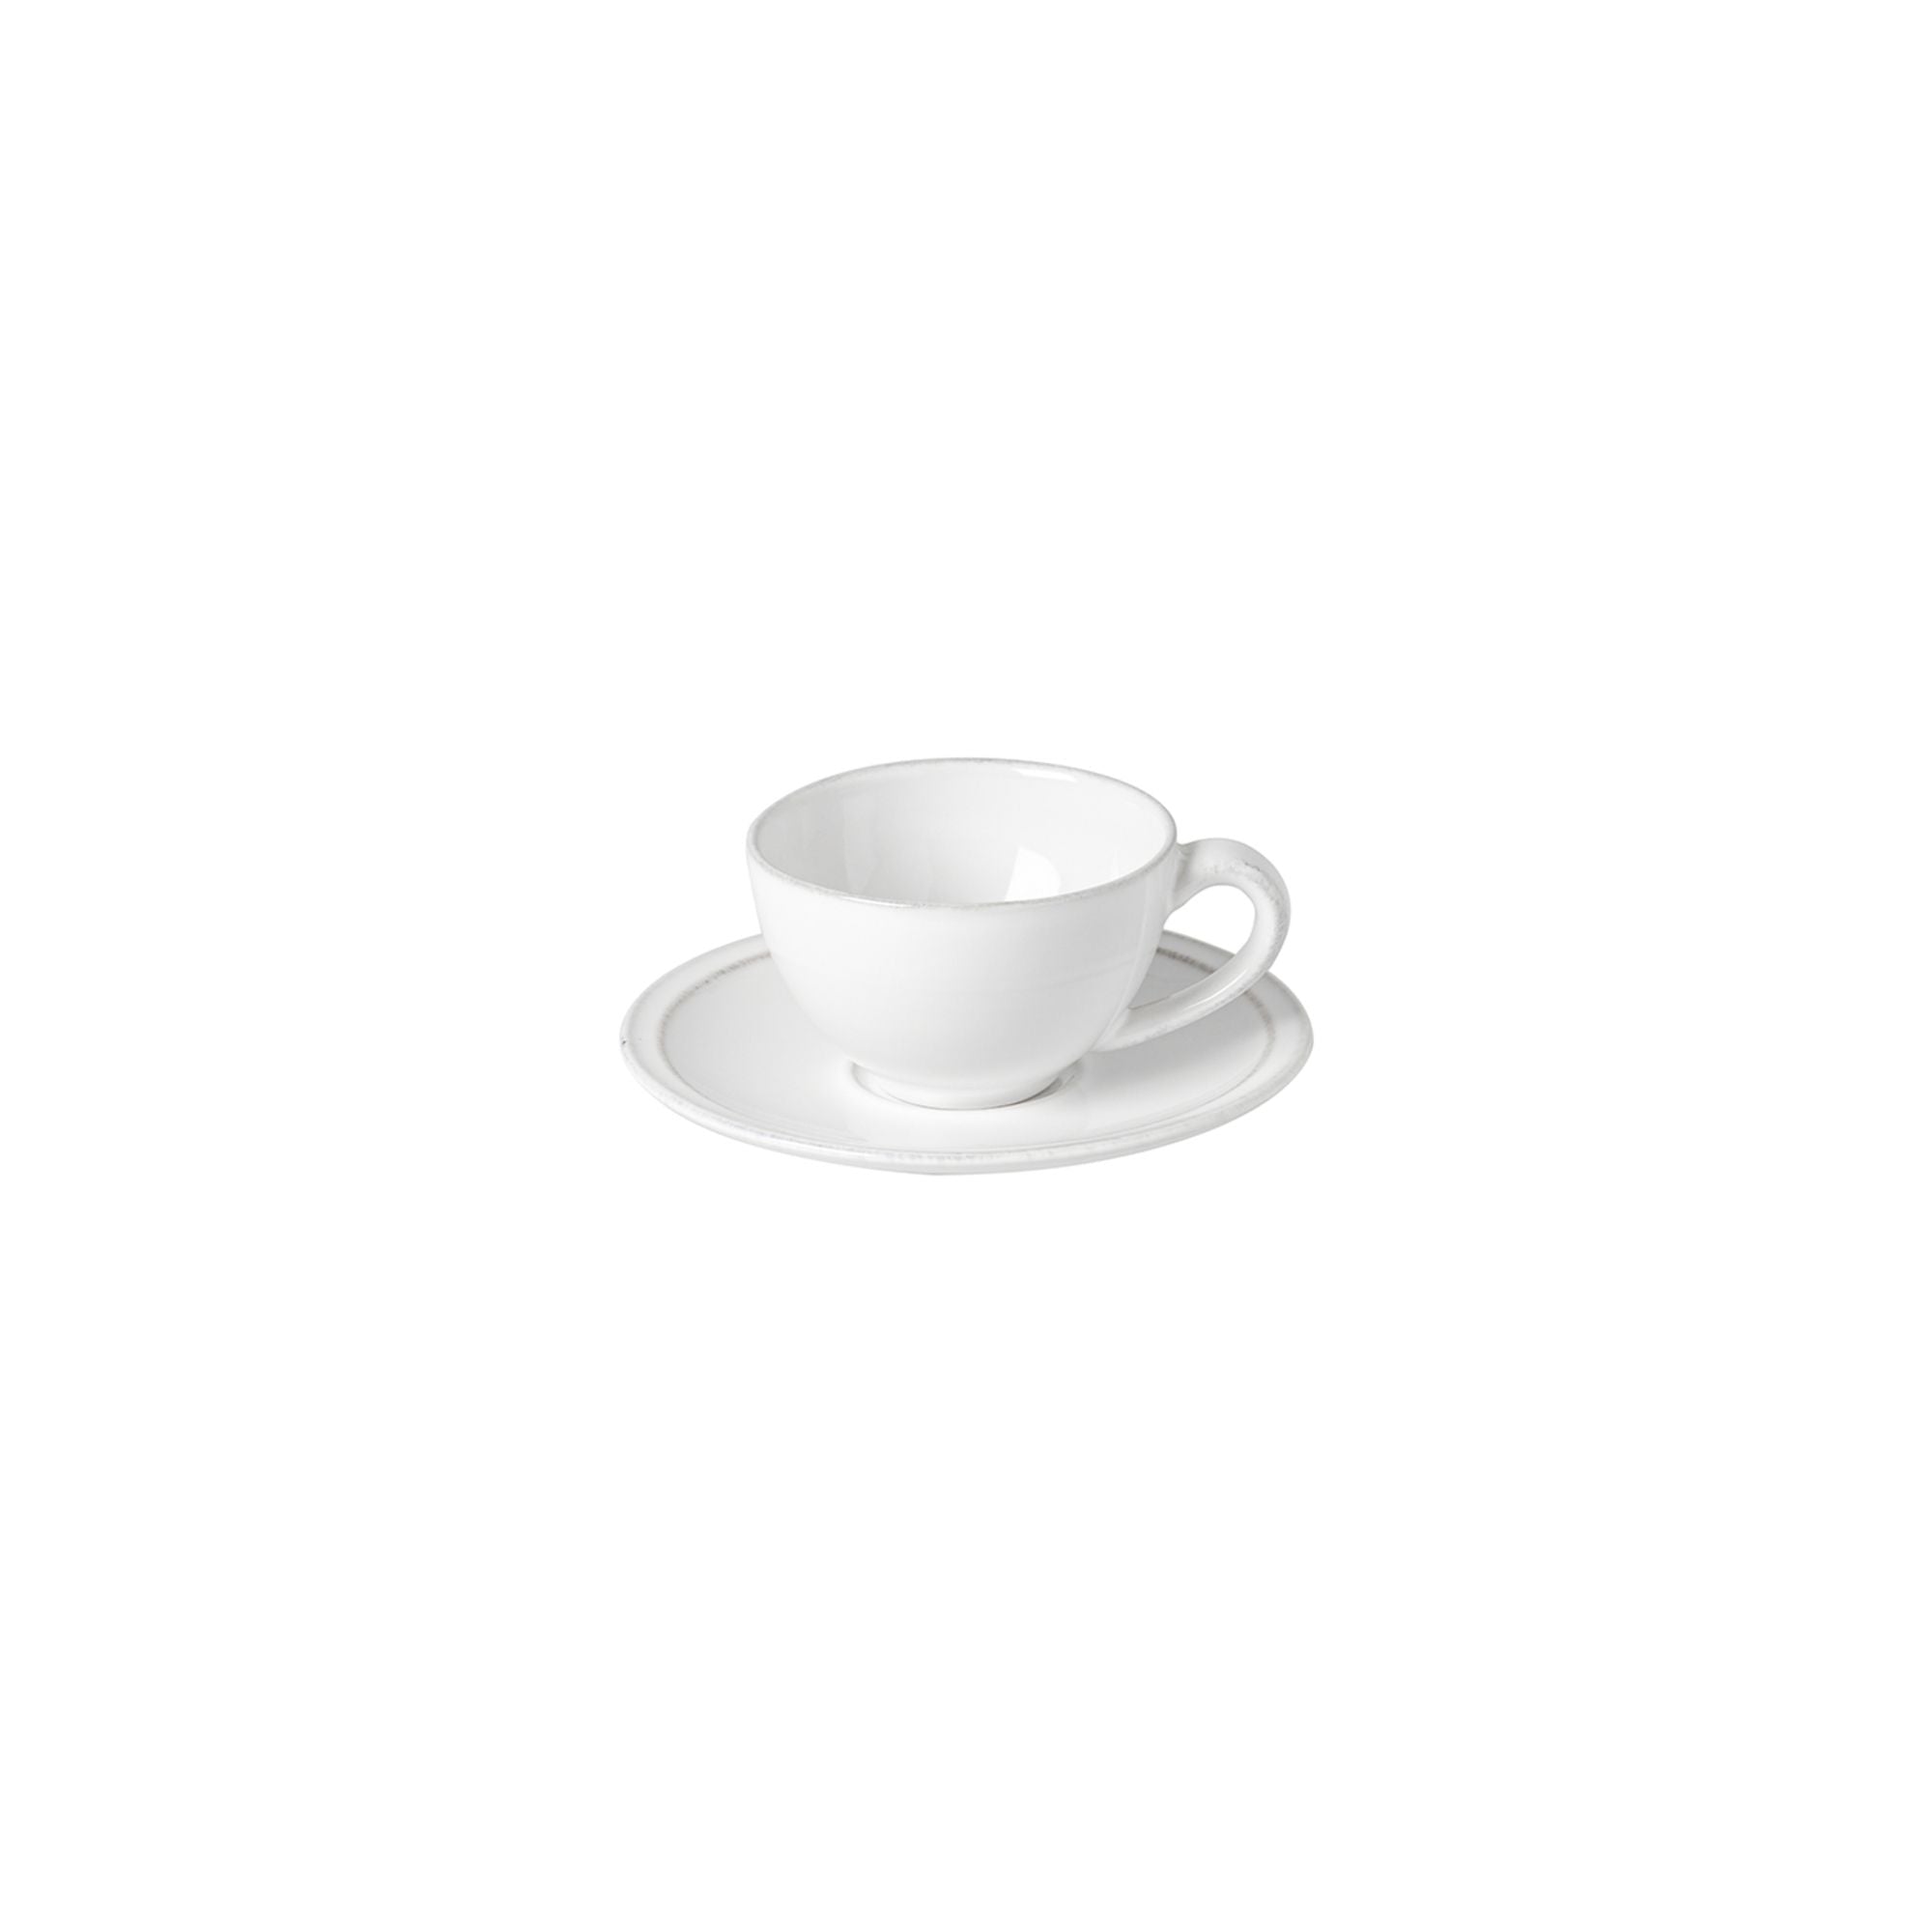 Friso Coffee Cup and Saucer 3 oz. White